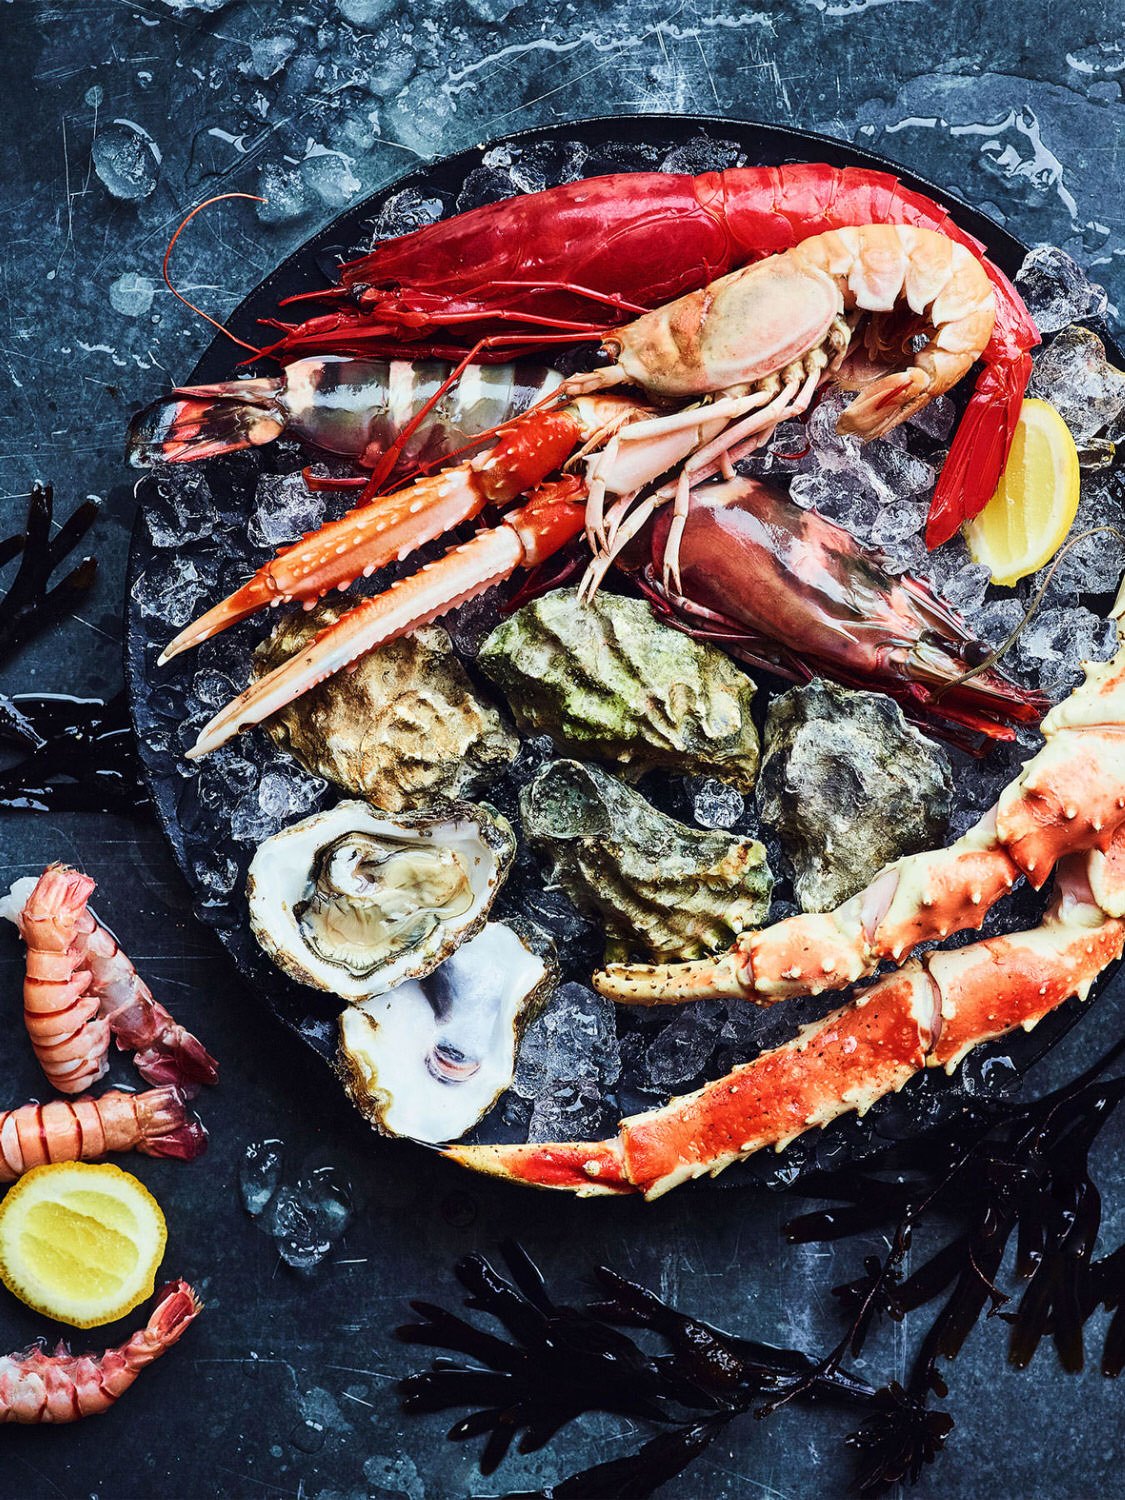 Seafood platter containing king crab claws, oysters, and a variety of different prawns - London Food & Drinks Photographer